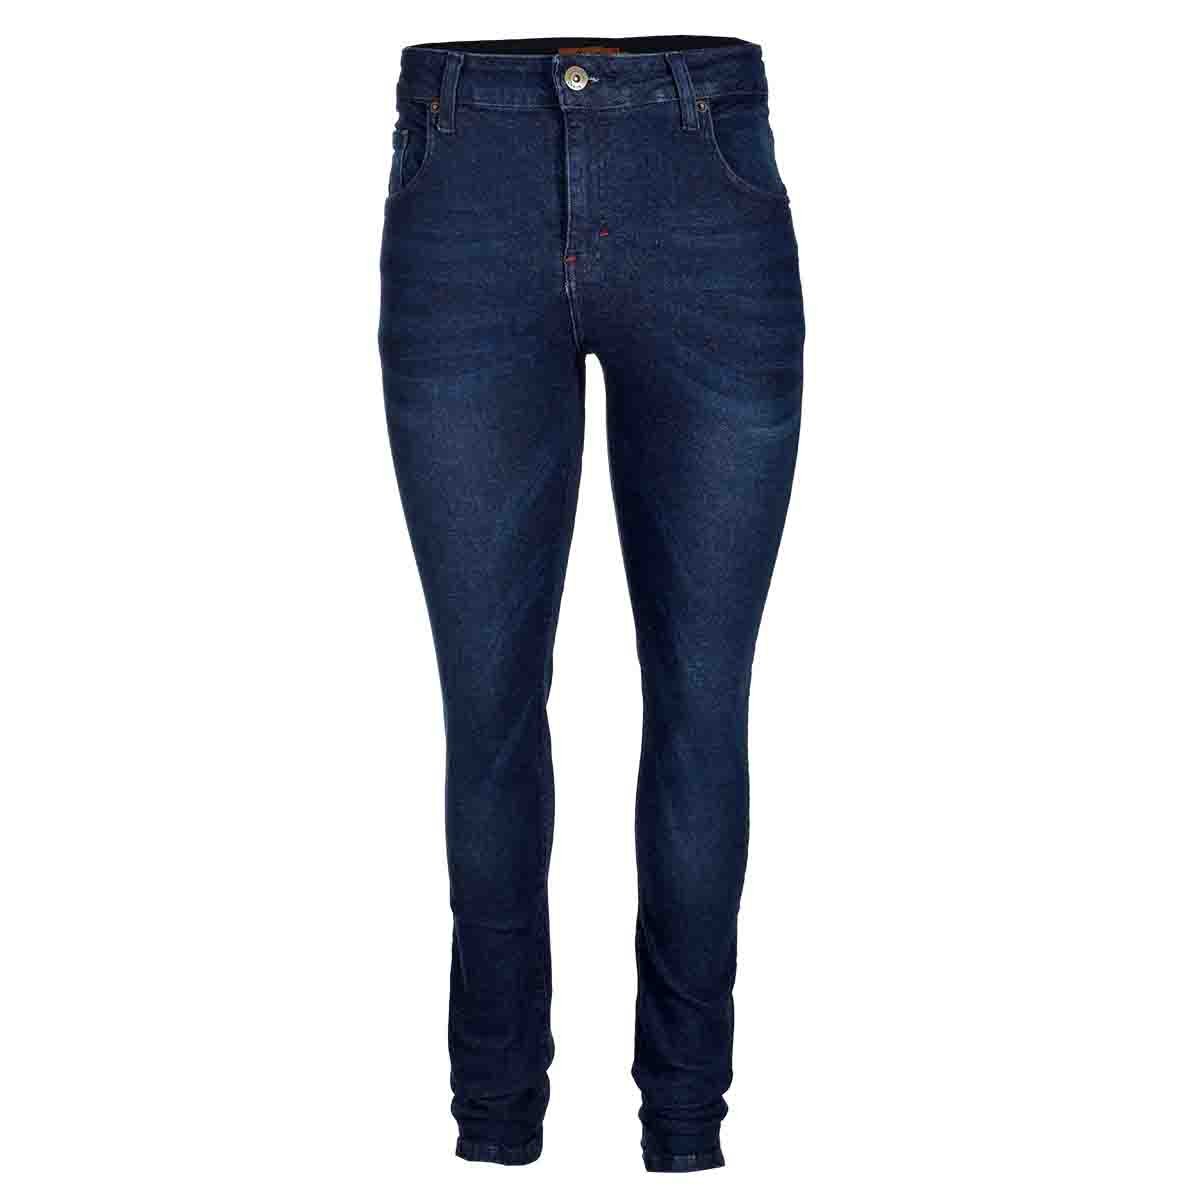 Jeans Yongster para Caballero